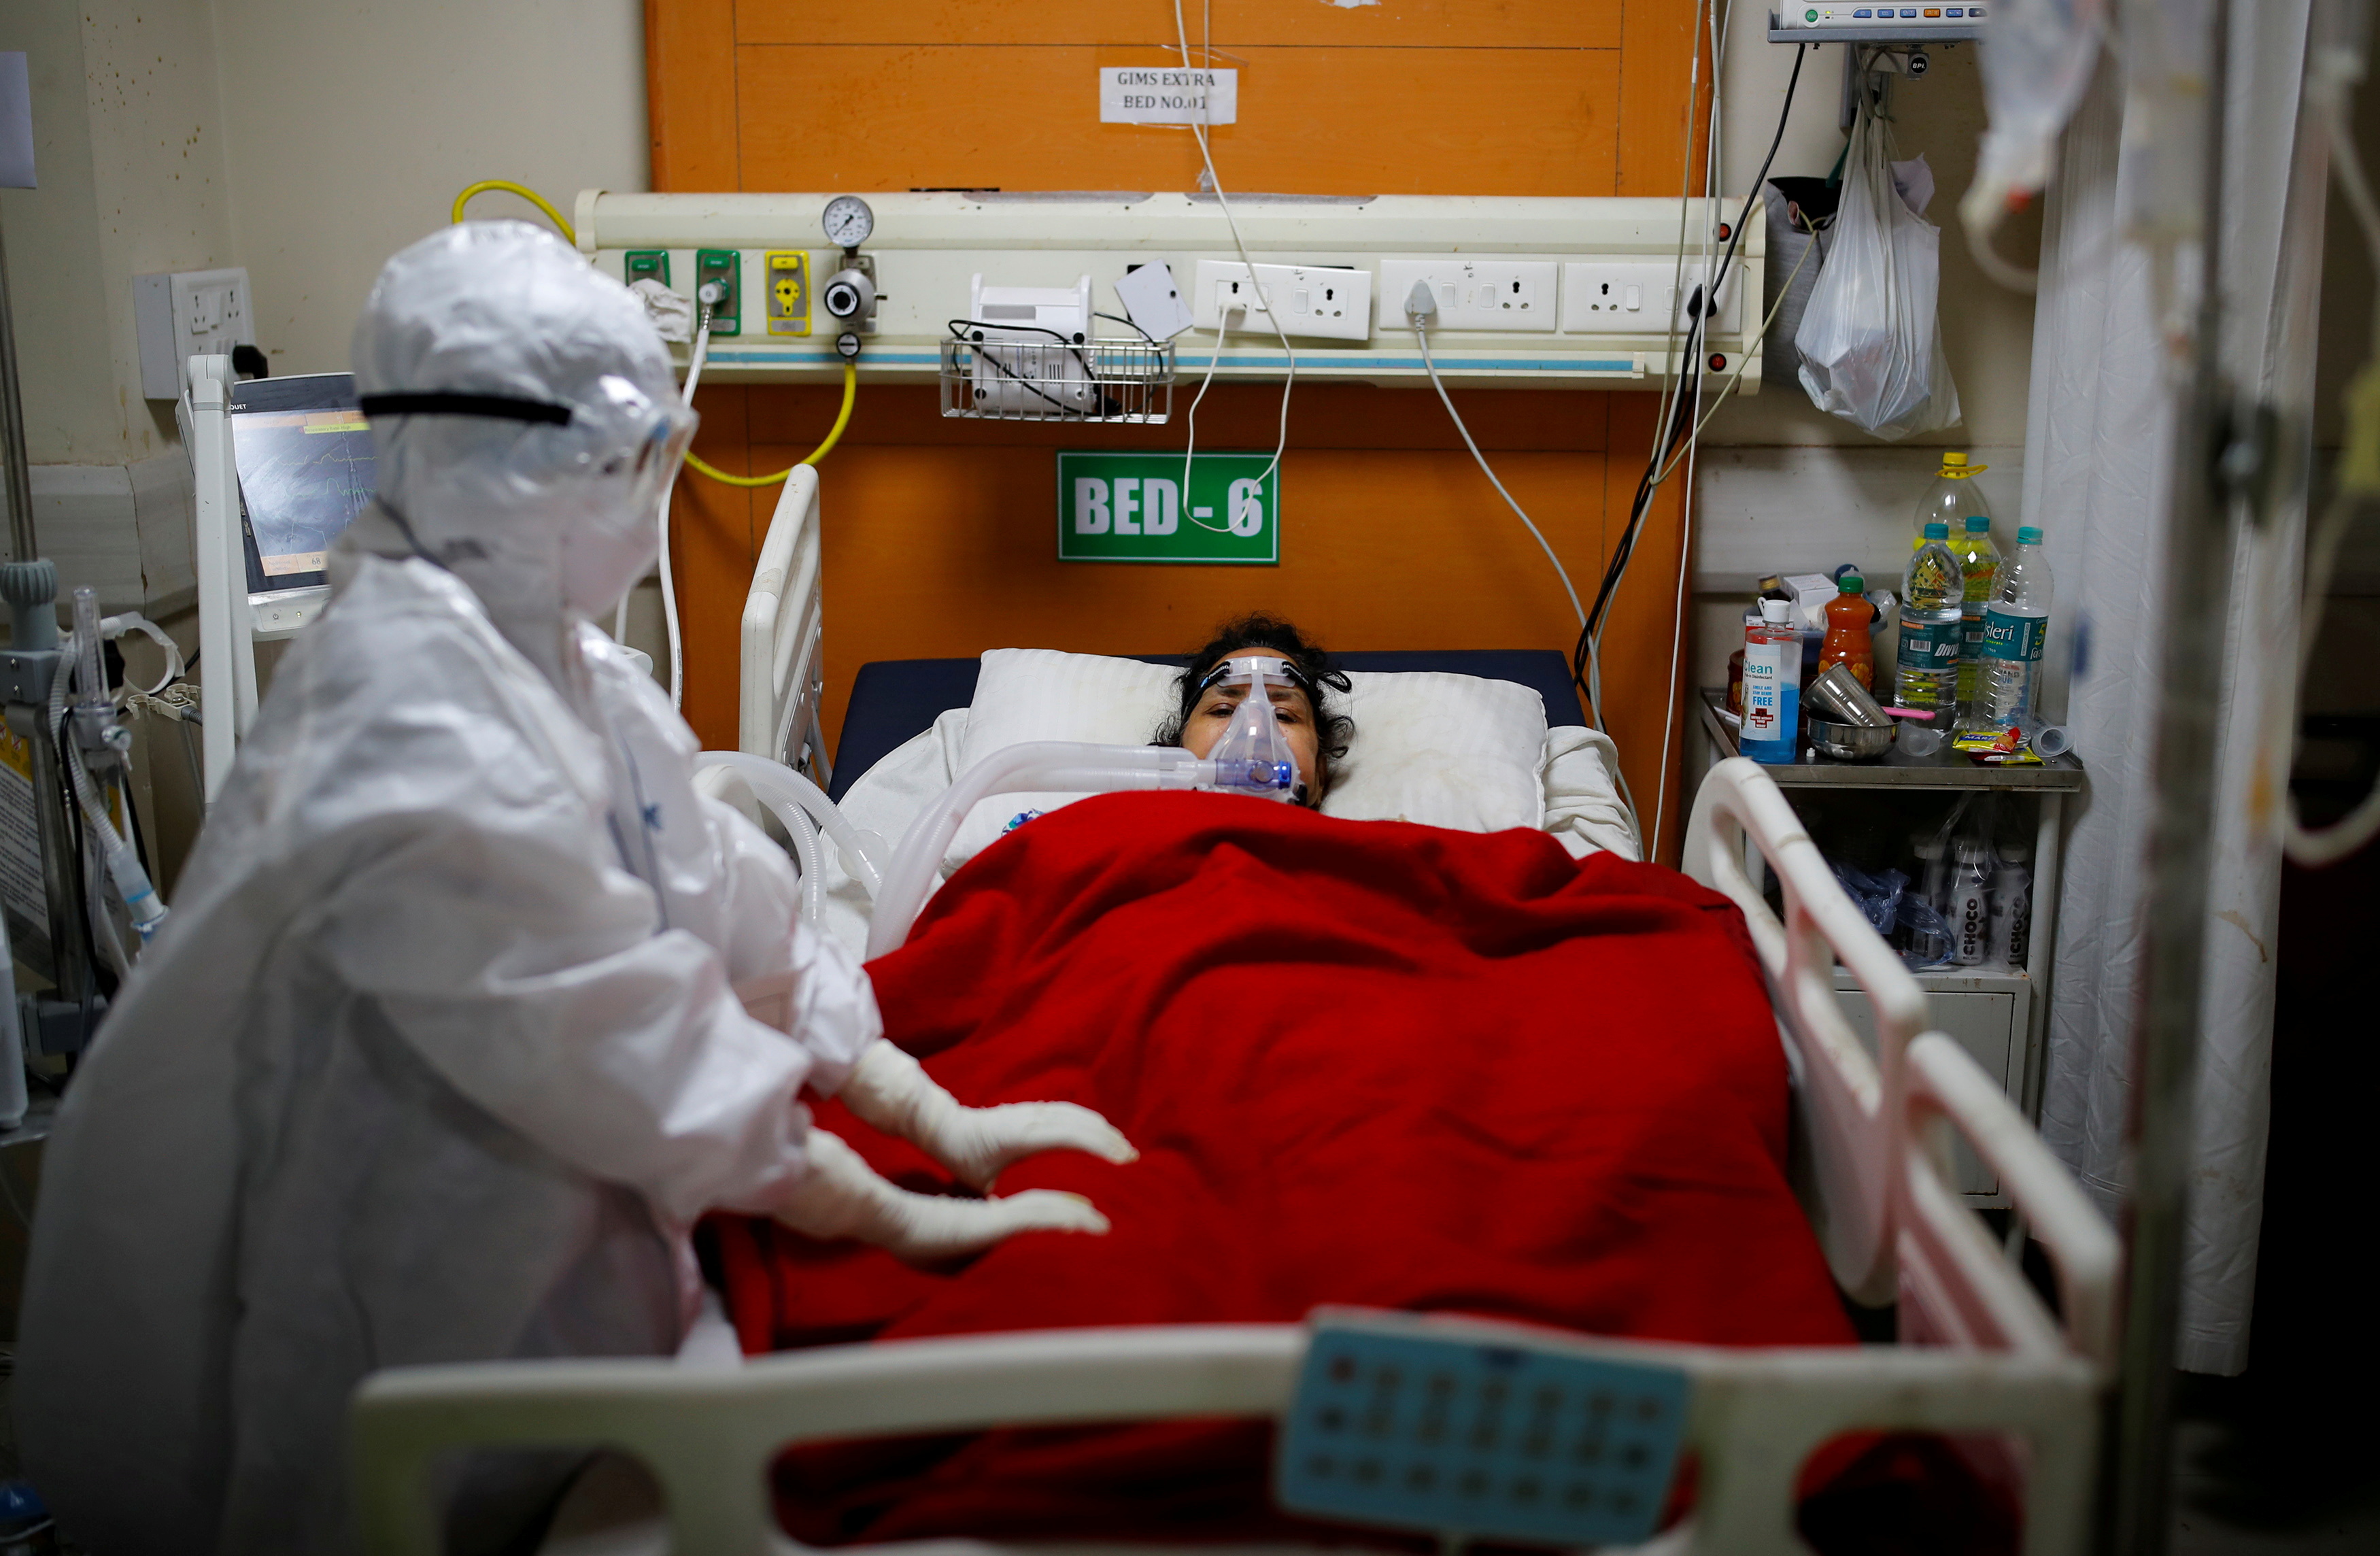 A medical worker takes care of a patient suffering from the coronavirus disease (COVID-19), inside the Intensive Care Unit (ICU) ward at the Government Institute of Medical Sciences (GIMS) hospital, in Greater Noida on the outskirts of New Delhi, India, May 21, 2021. REUTERS/Adnan Abidi/File Photo